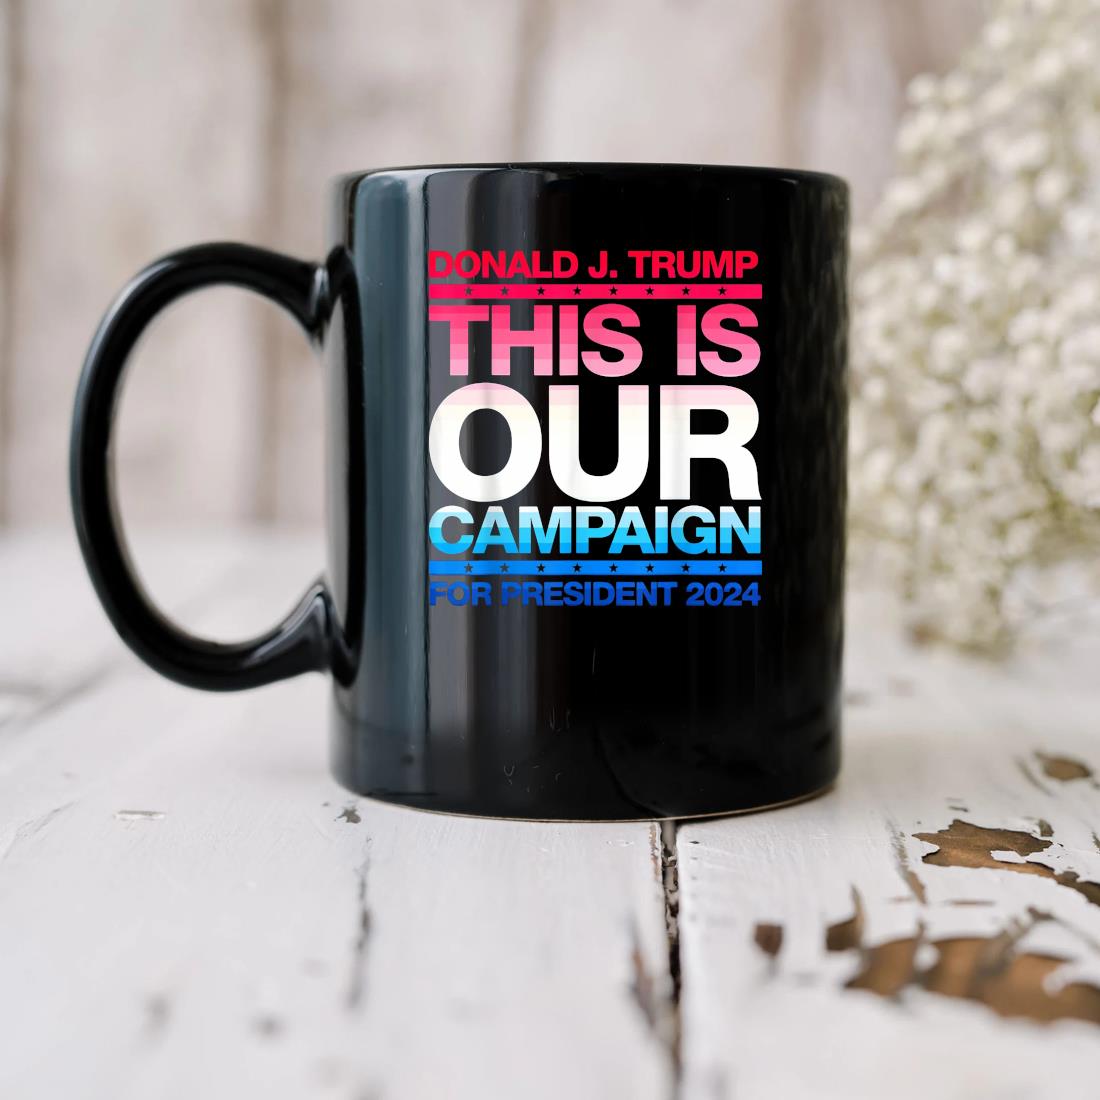 Donald J. Trump This Is Our Campaign For President 2024 Mug biu